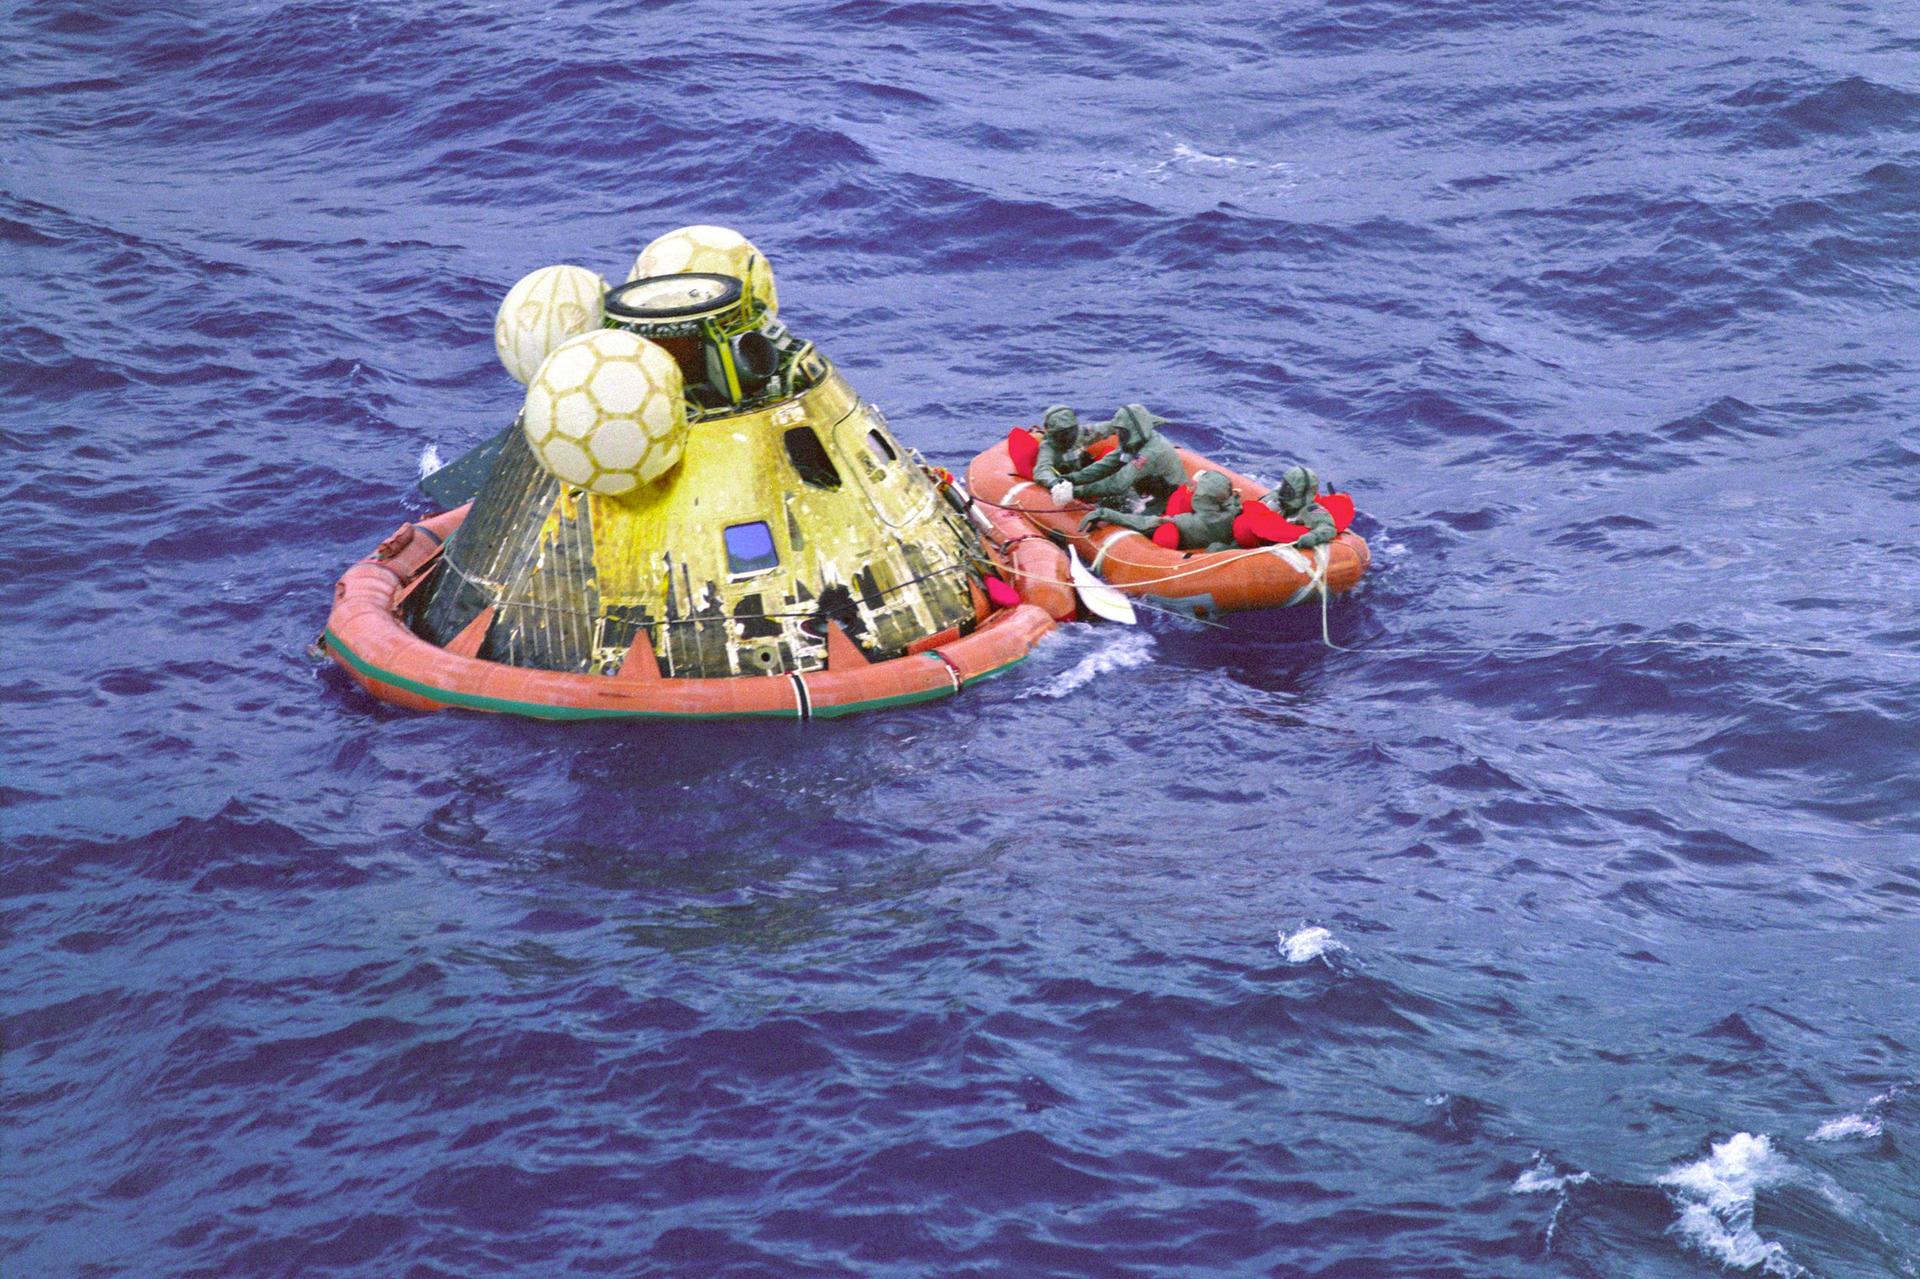 A small orange raft is shown with astaurants aboard, floating next to luna modual.